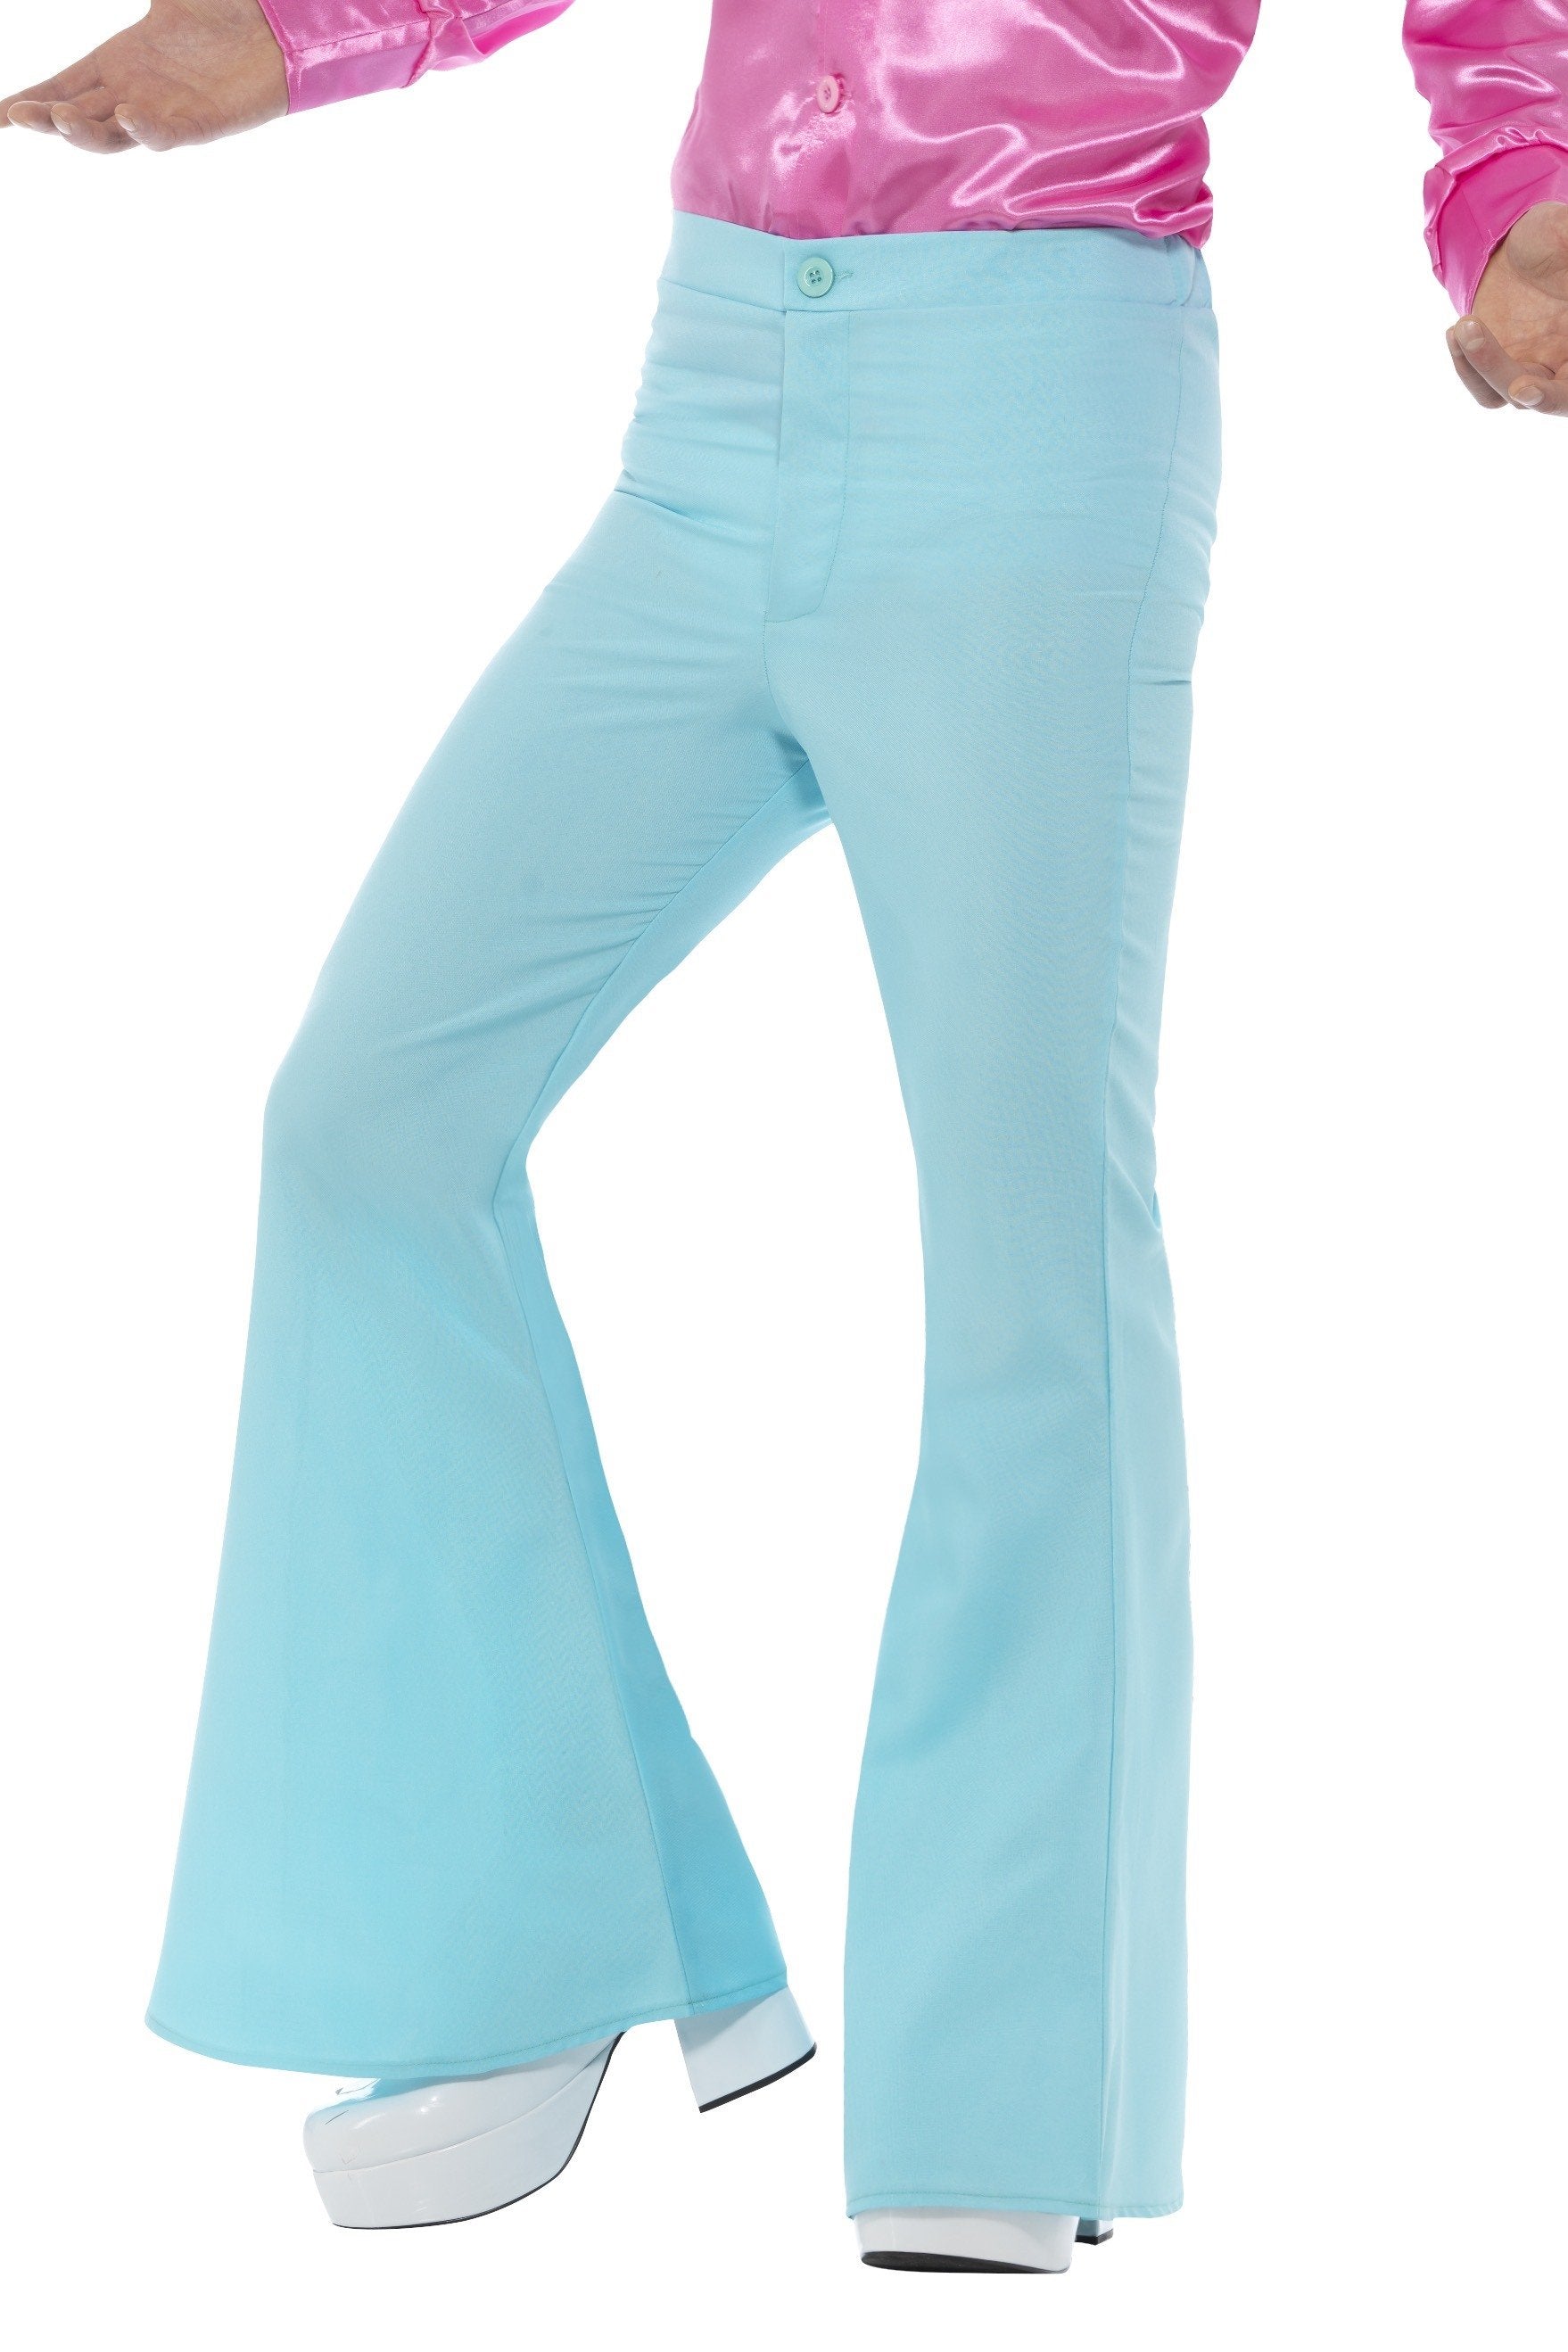 60s 70s Light Blue Flares Retro Bell Bottoms Disco Flared Trousers